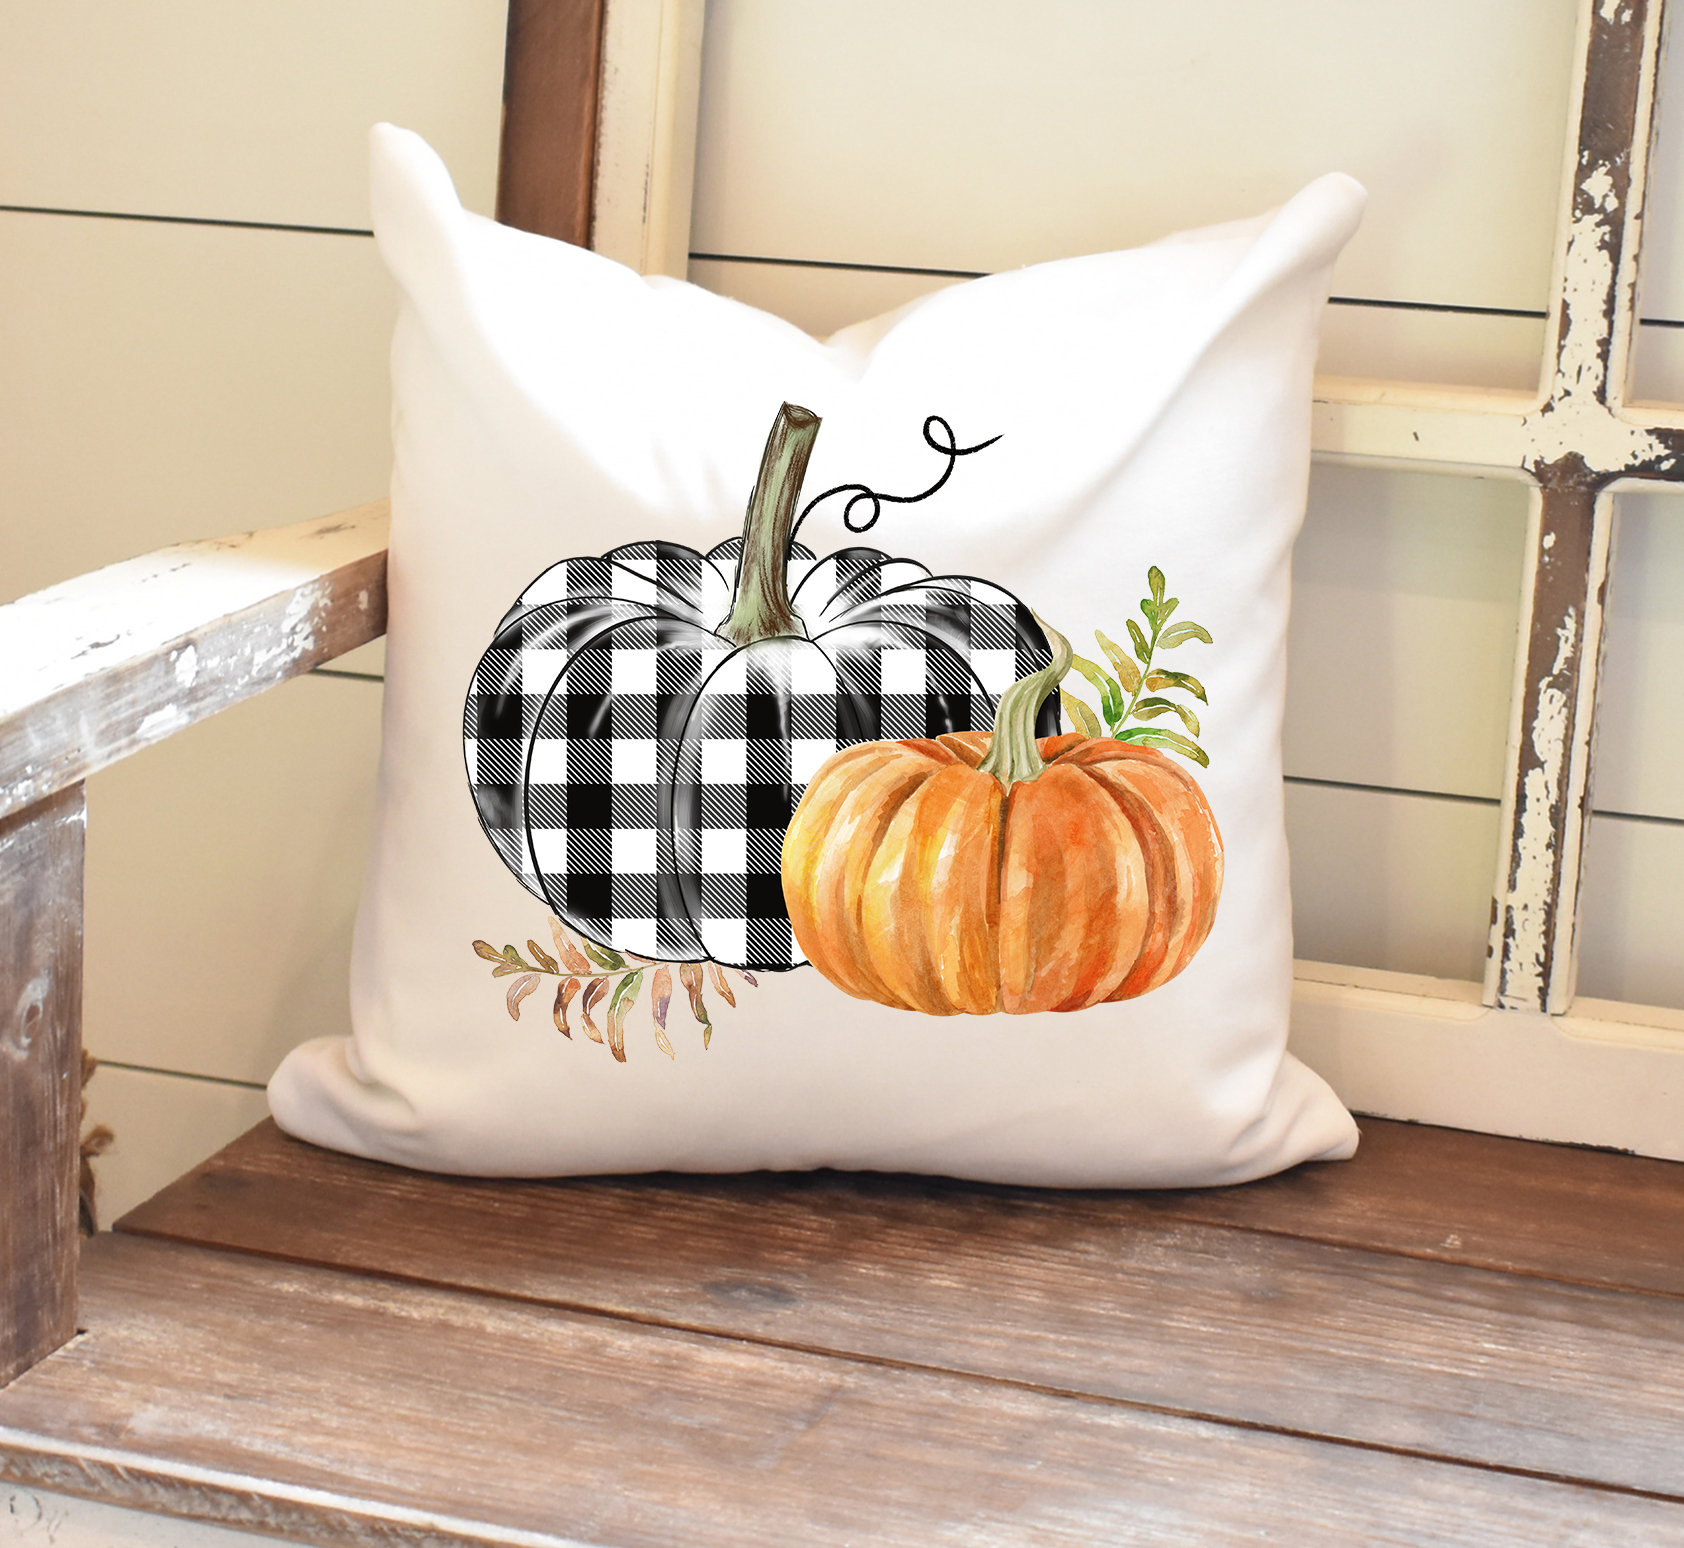 Fall Coastal Indoor Outdoor Pillow Cover, Embroidered Pumpkin with Fringed Trim, Neutral Tan, 20x20